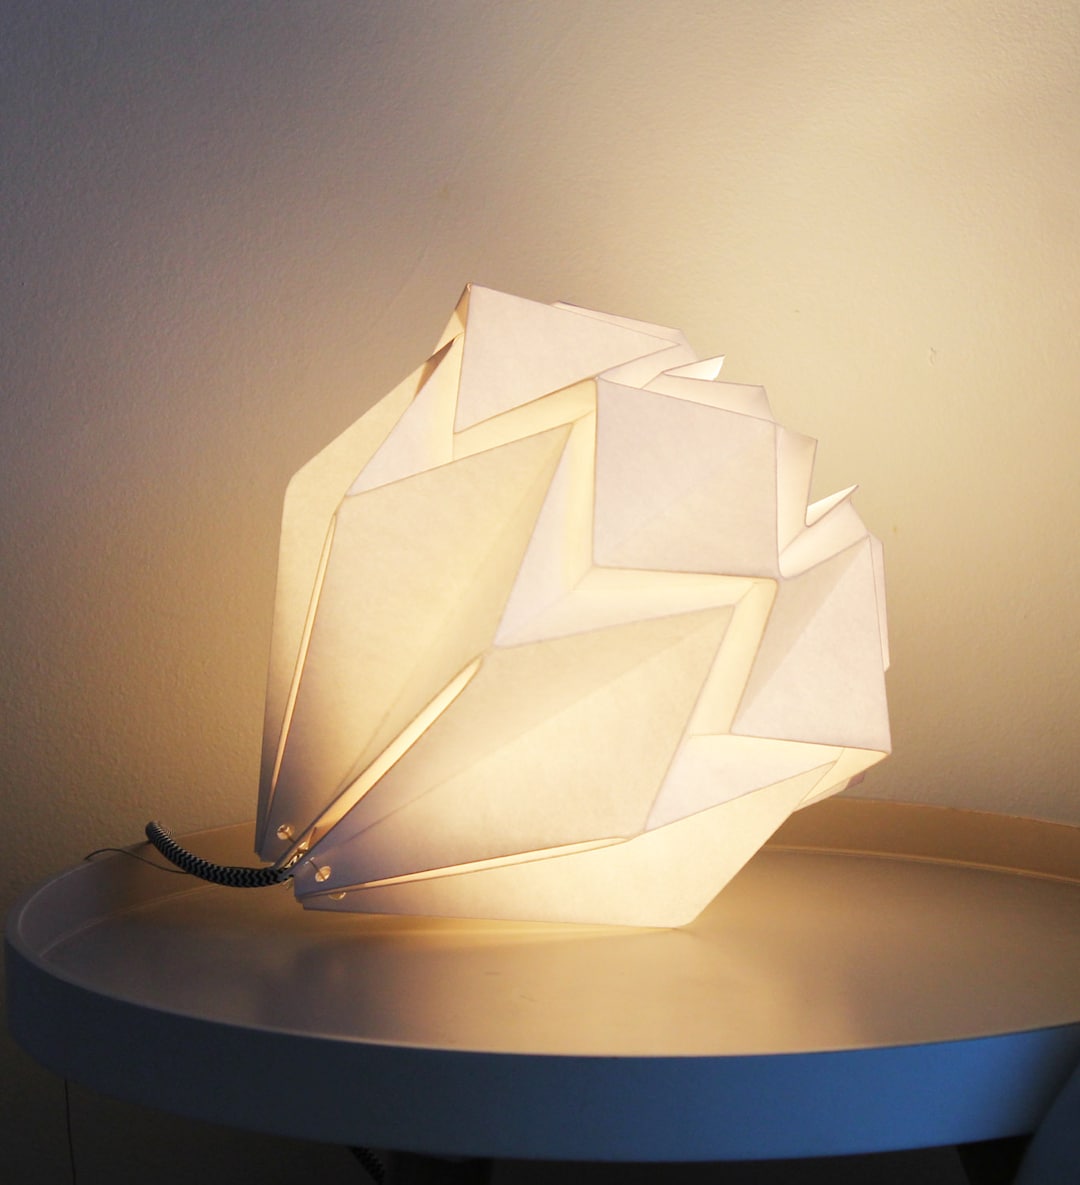 Origami Table Lamp Handmade in Paper - Etsy